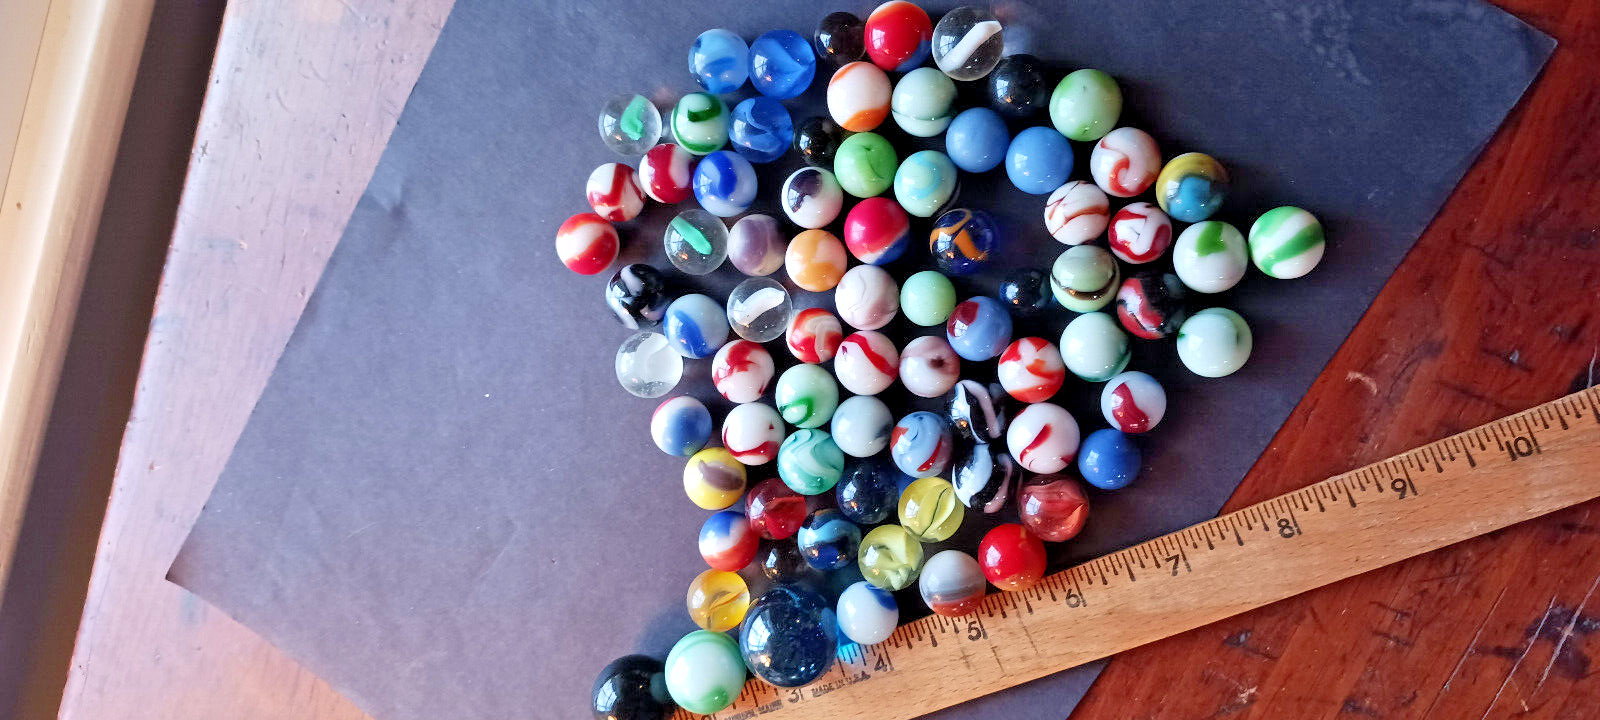 Vintage lot of 75 playing marbles - Anything good??